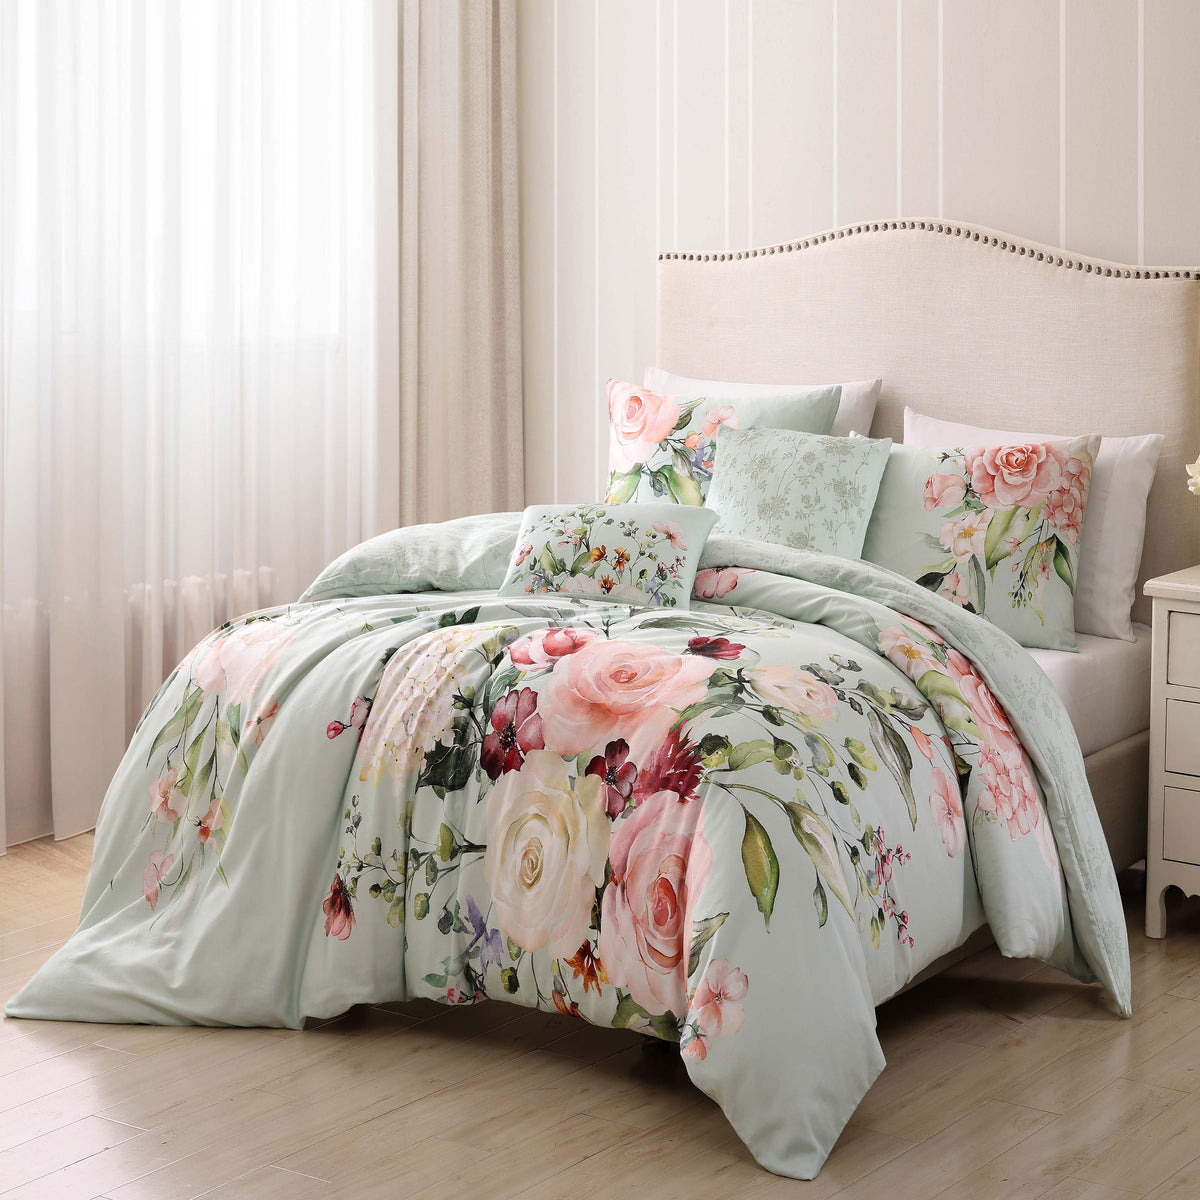 What are the current bedding trends in 2023? – Latest Bedding